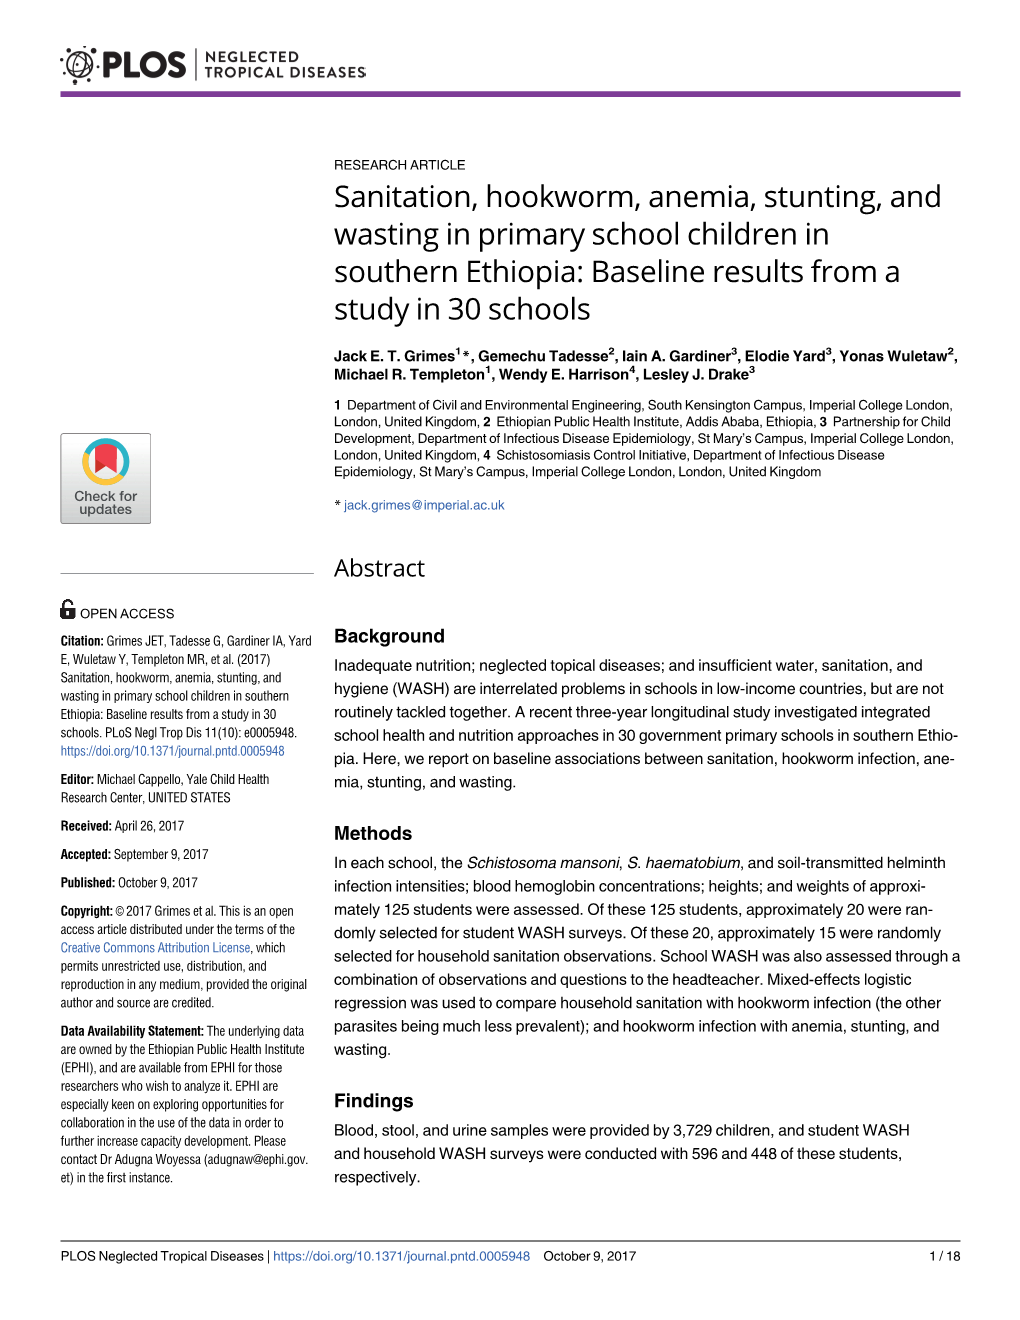 Sanitation, Hookworm, Anemia, Stunting, and Wasting in Primary School Children in Southern Ethiopia: Baseline Results from a Study in 30 Schools